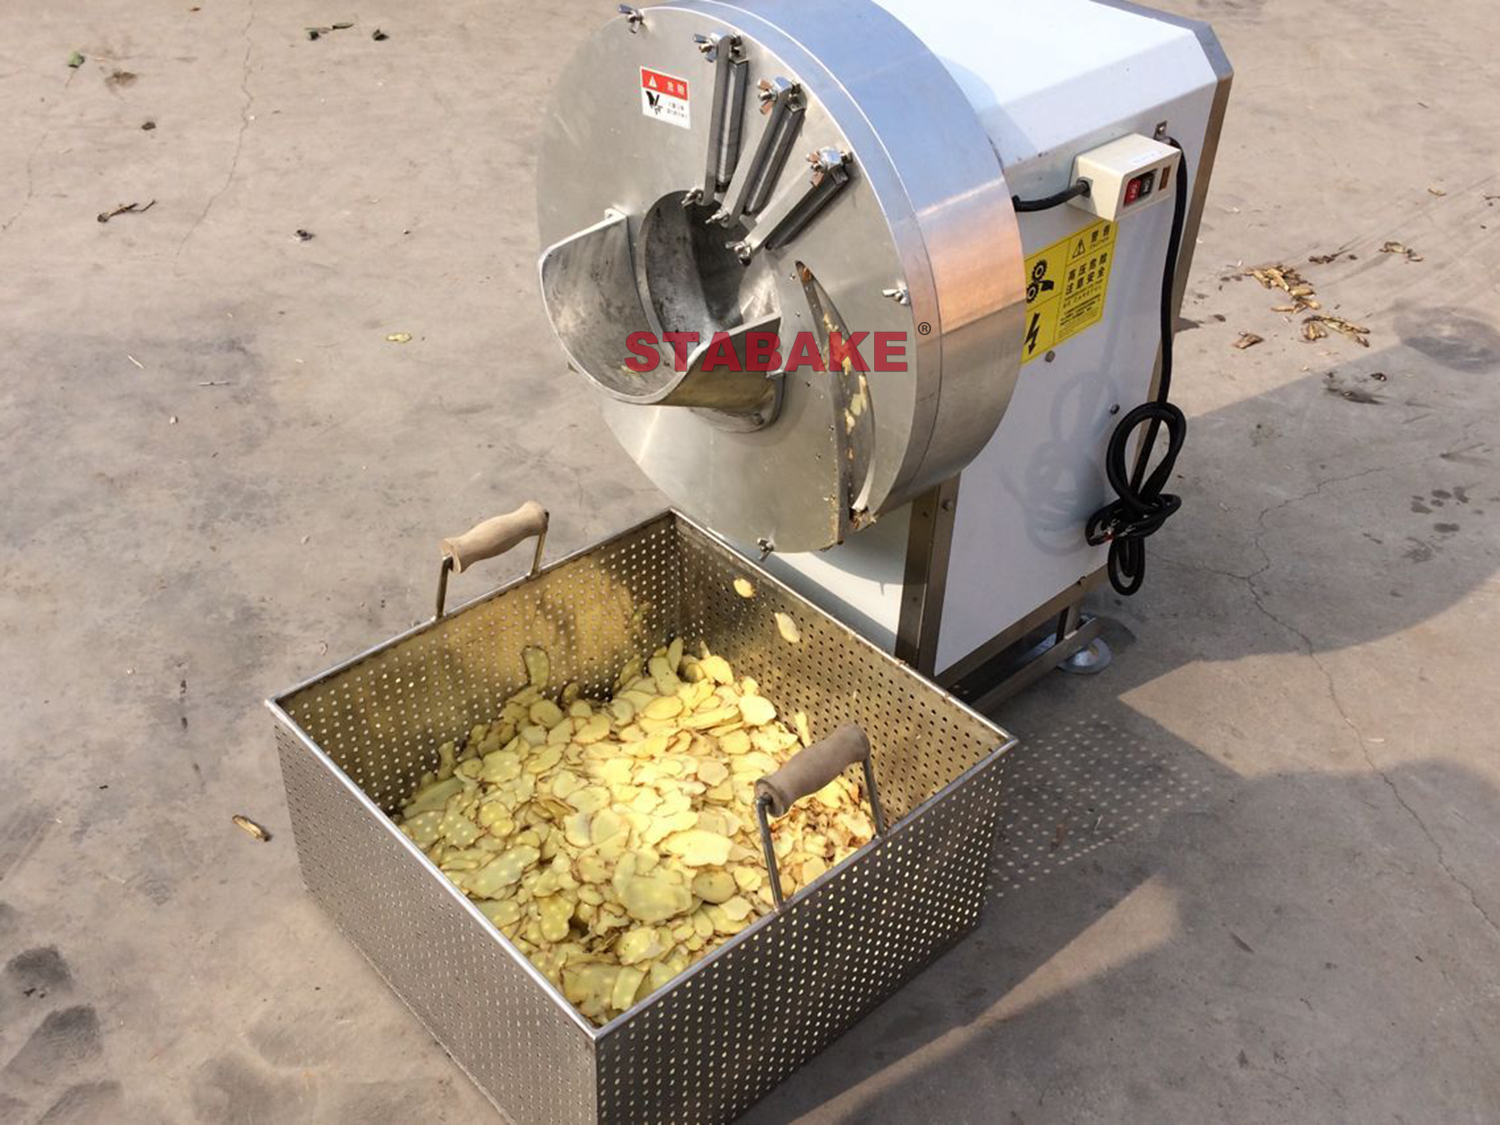 Commercial Ginger Cutting Machine for Ginger Shredding Processing Machine 